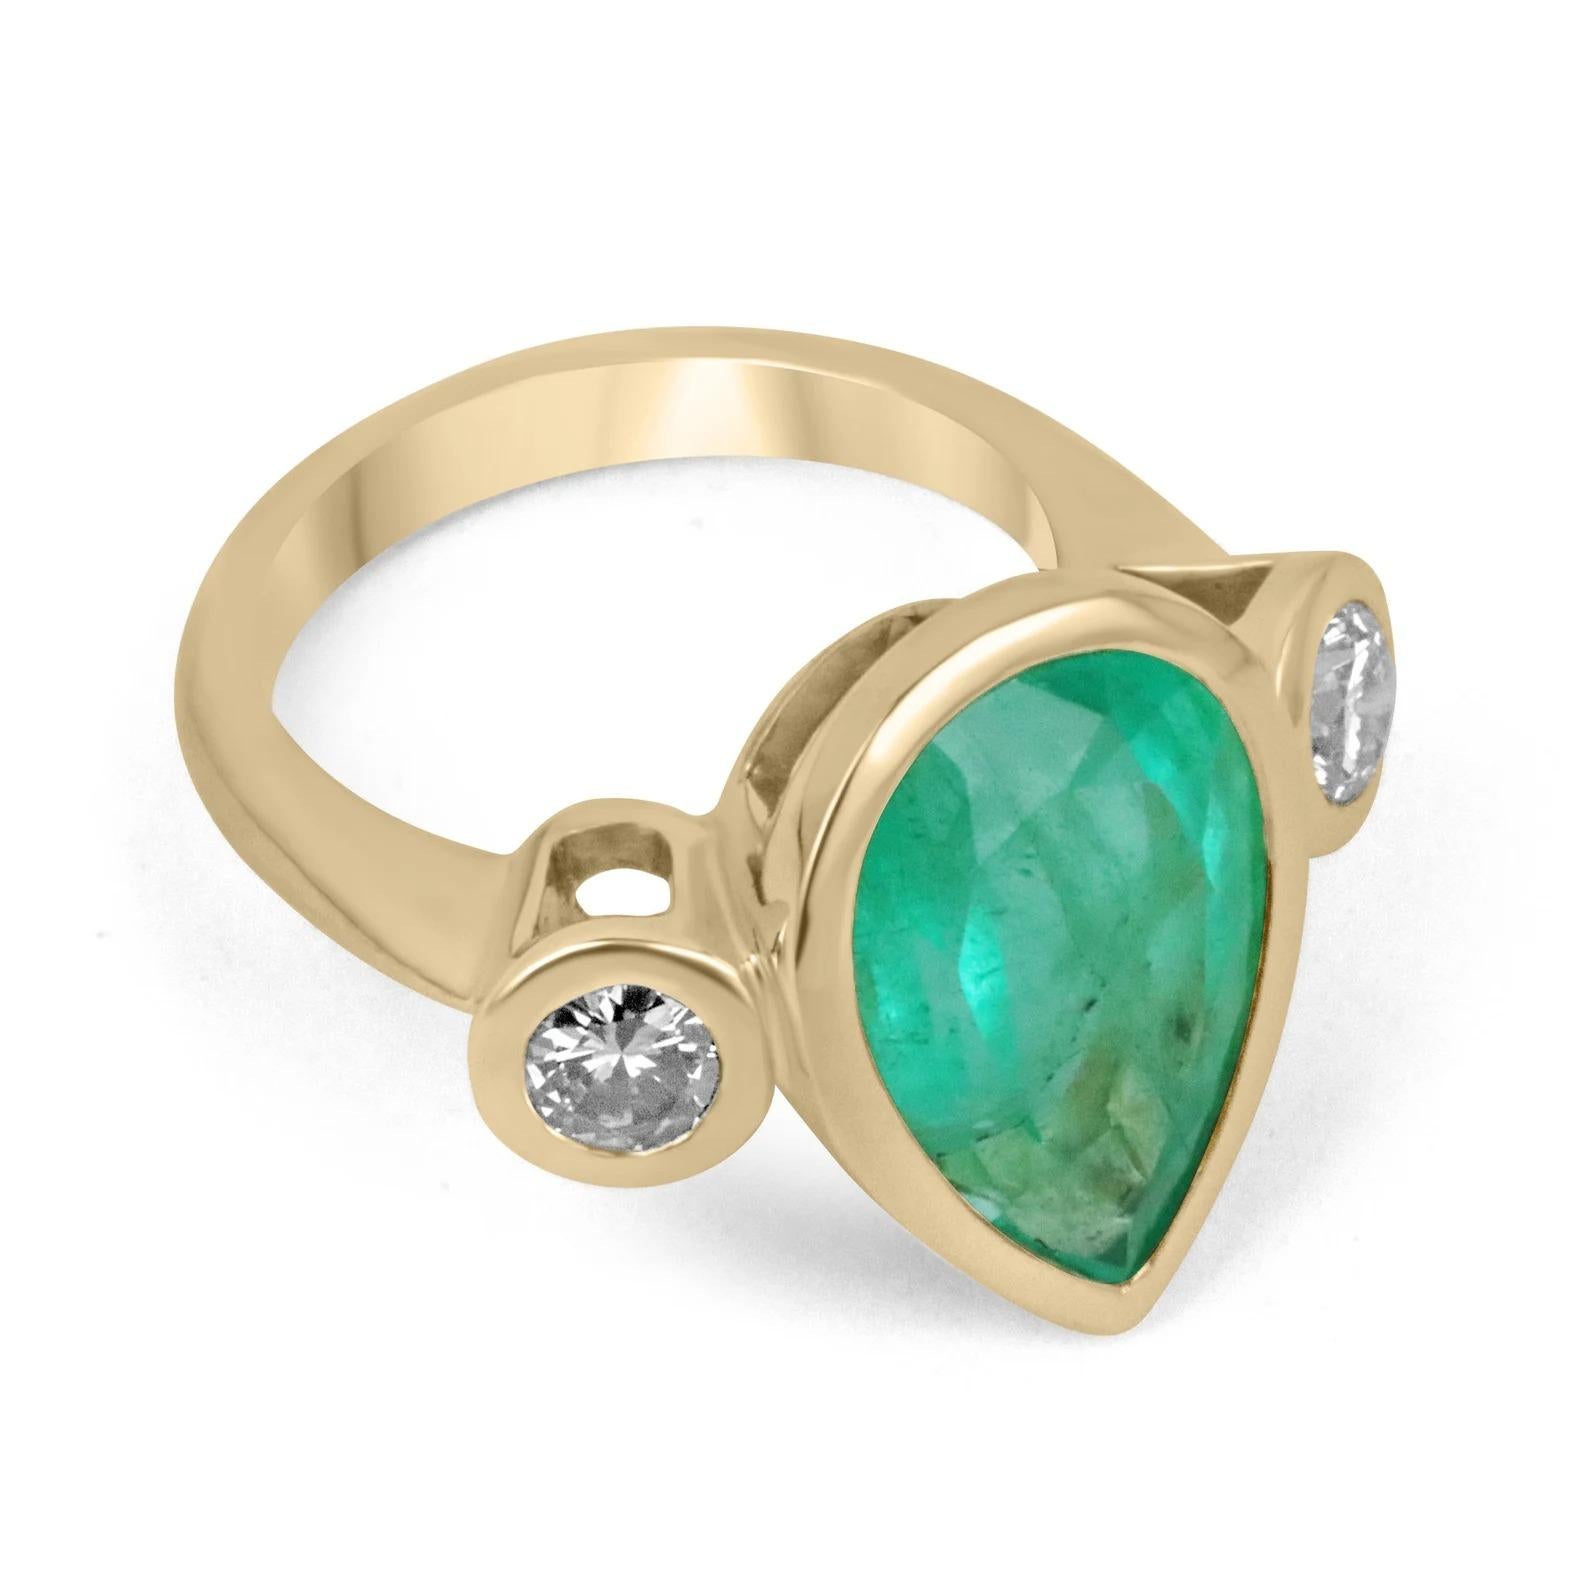 Displayed is an impressive vivid large emerald & diamond three-stone ring in 18K yellow gold. This one of a kind solitaire ring carries a pear emerald in a secure bezel setting. Fully faceted, this rare gemstone showcases good shine and brilliance.